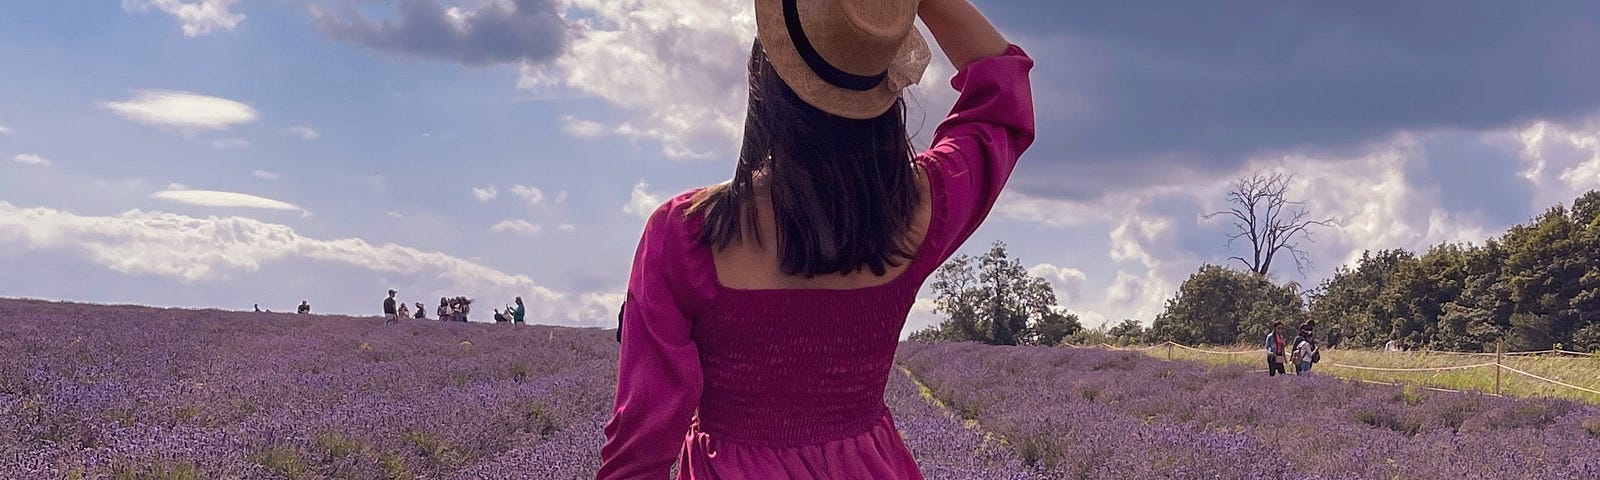 Lady in a purple dress with her back to the camera. She is staring at a field of purple flowers.